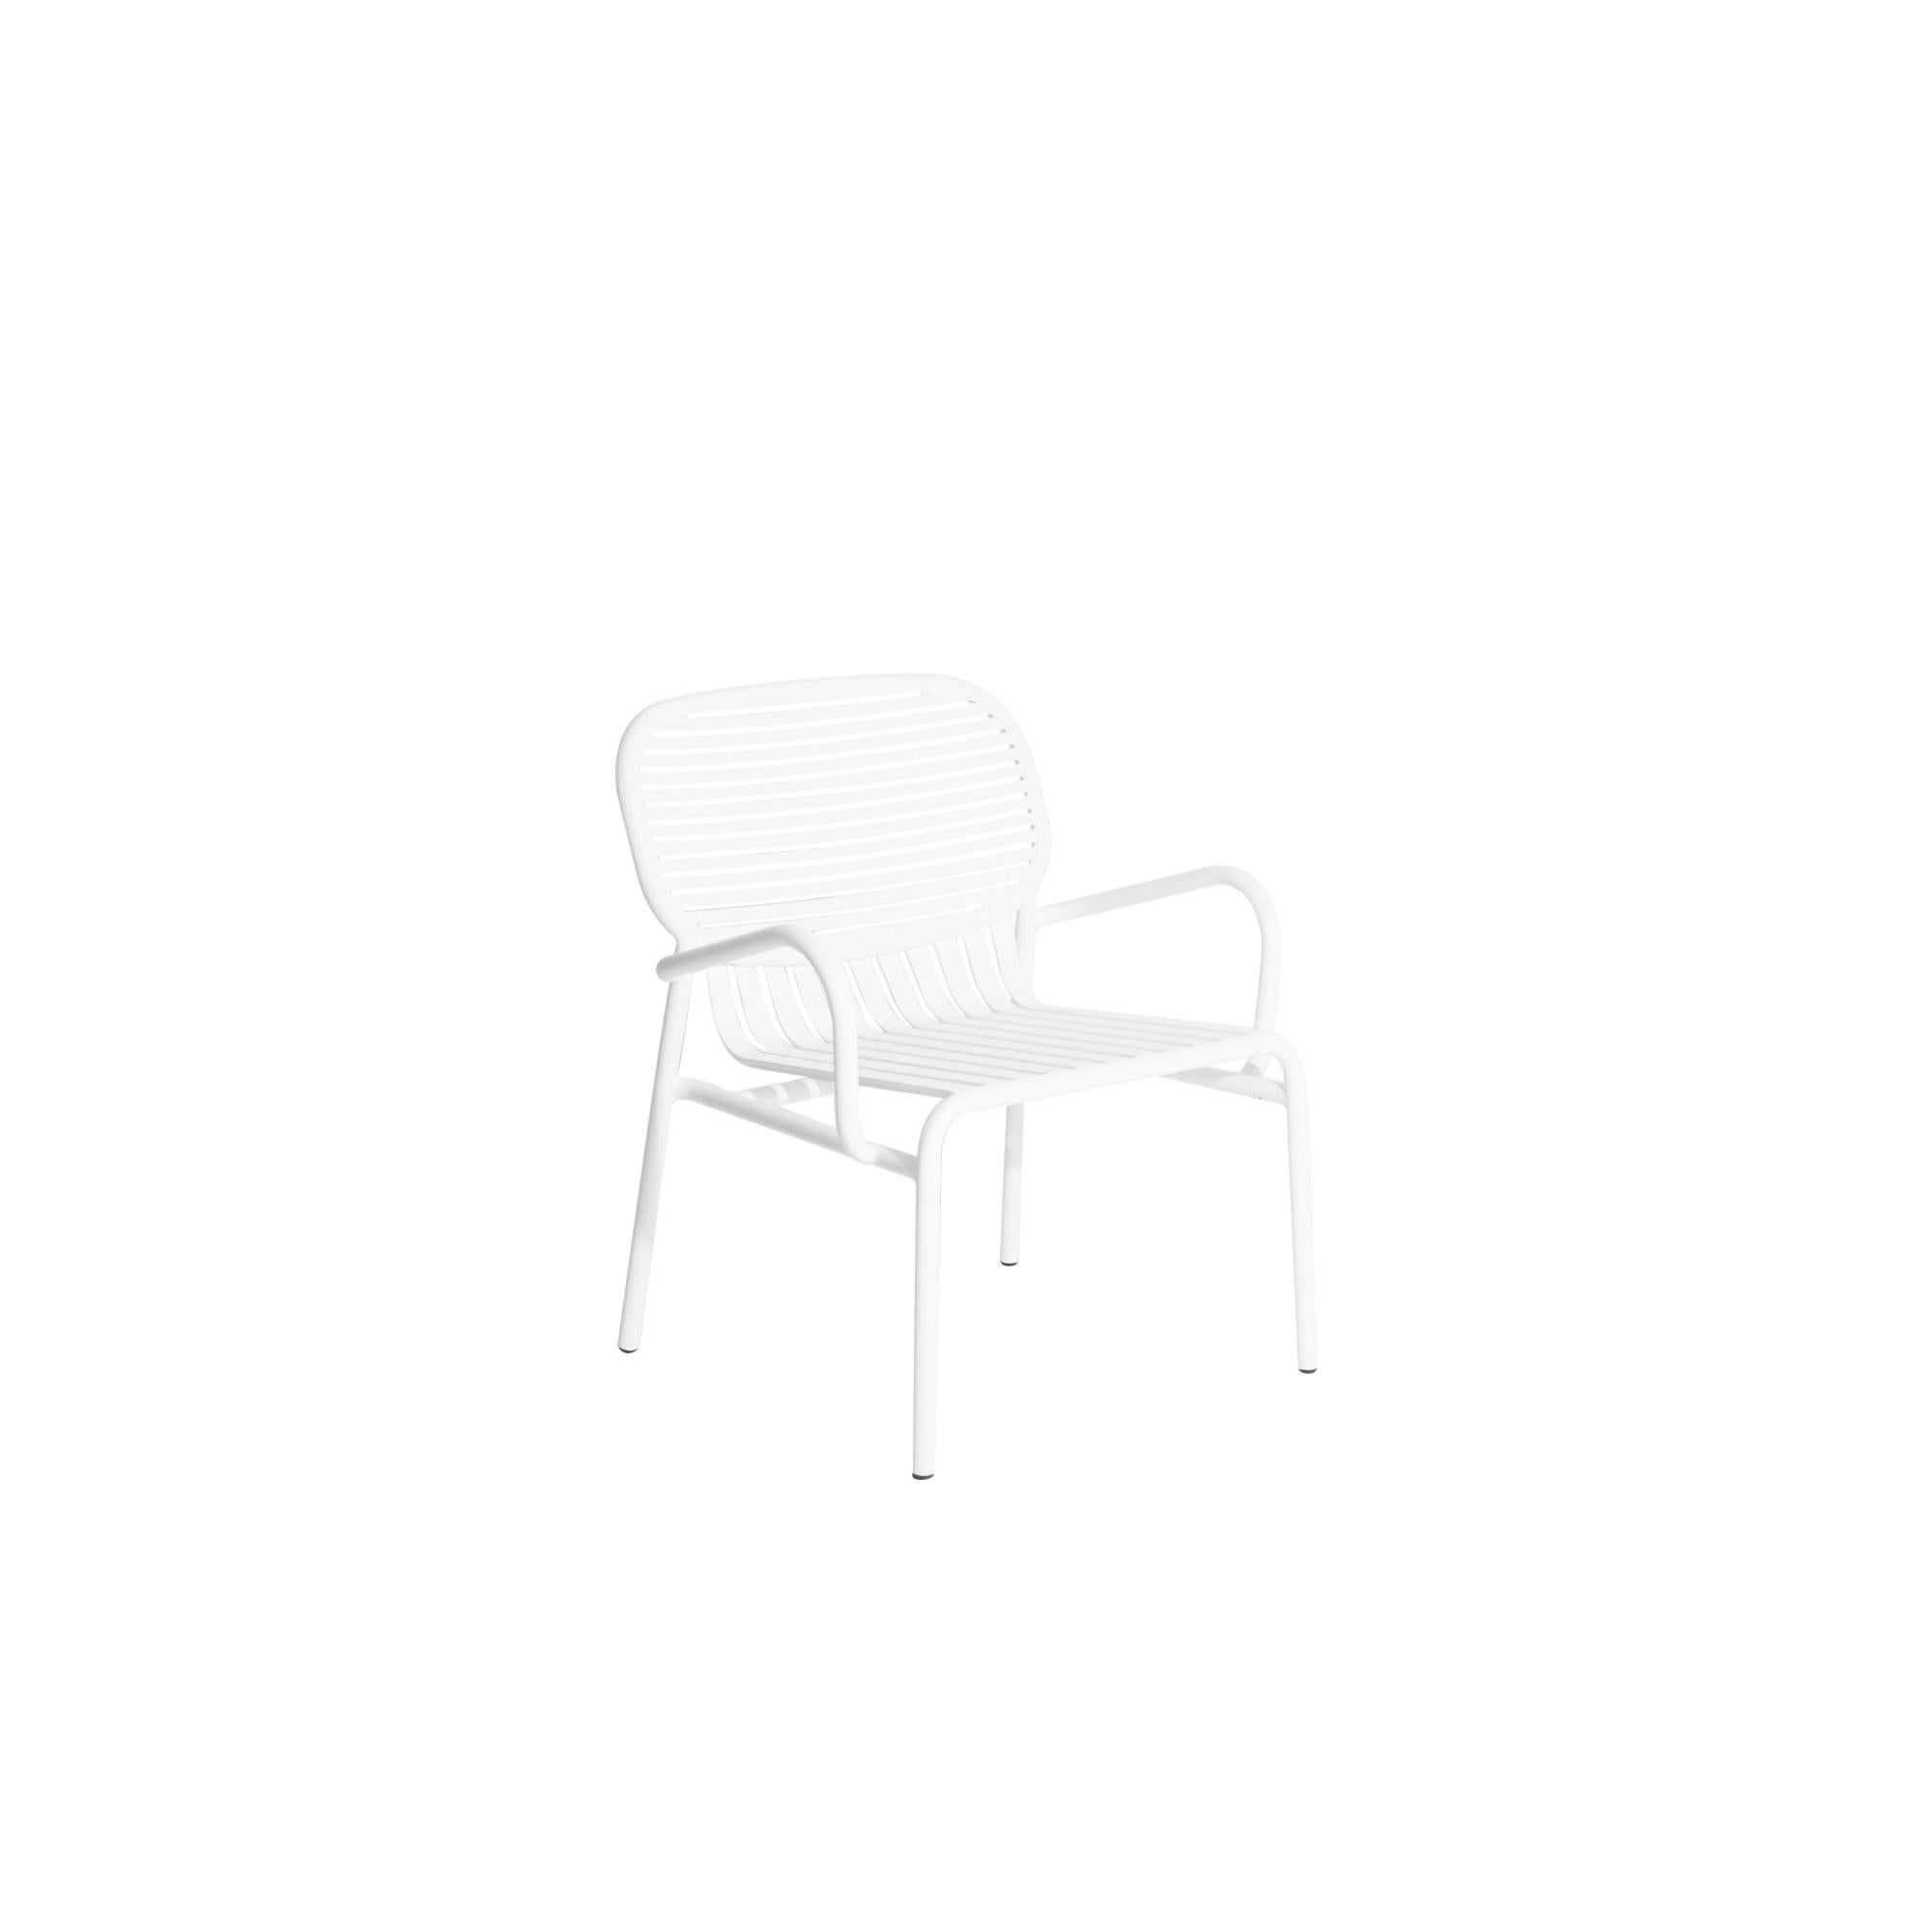 Petite Friture Week-End Armchair in White Aluminium by Studio BrichetZiegler, 2017

The week-end collection is a full range of outdoor furniture, in aluminium grained epoxy paint, matt finish, that includes 18 functions and 8 colours for the